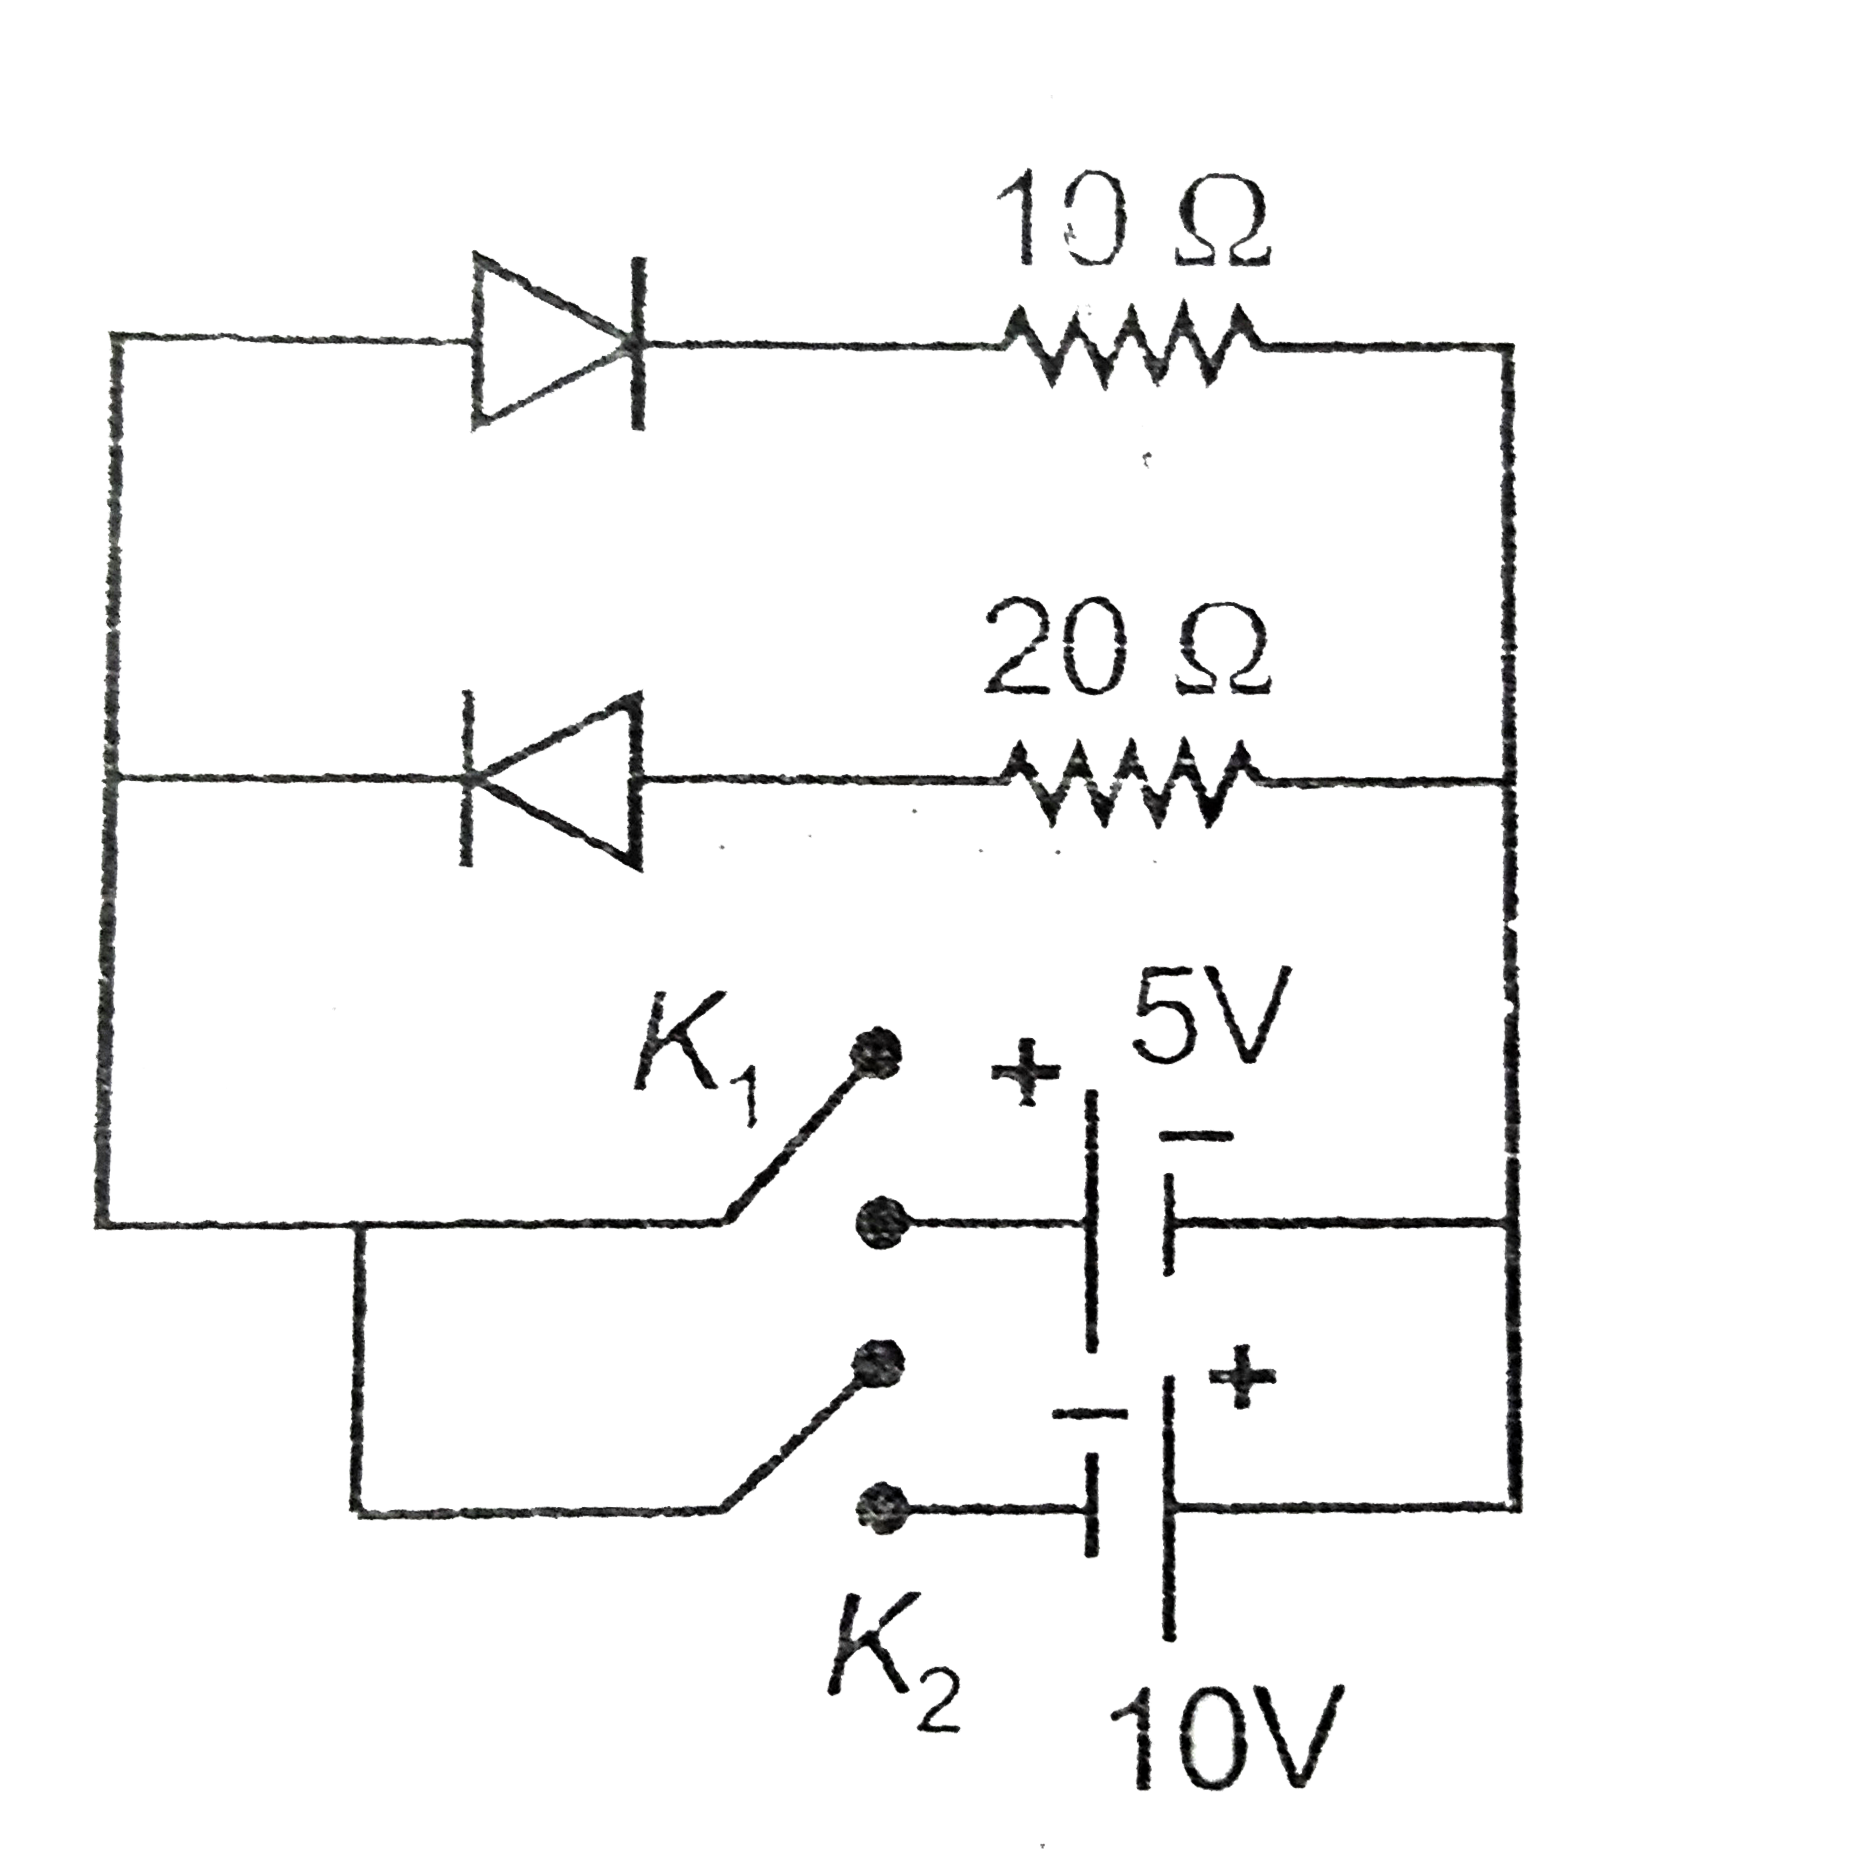 In the given circuit, calculate the ratio of currents through the battery if (1) Key K(1) is pressed, K(2) open and then (2) Key K(2) is pressed, key K(1) is opened